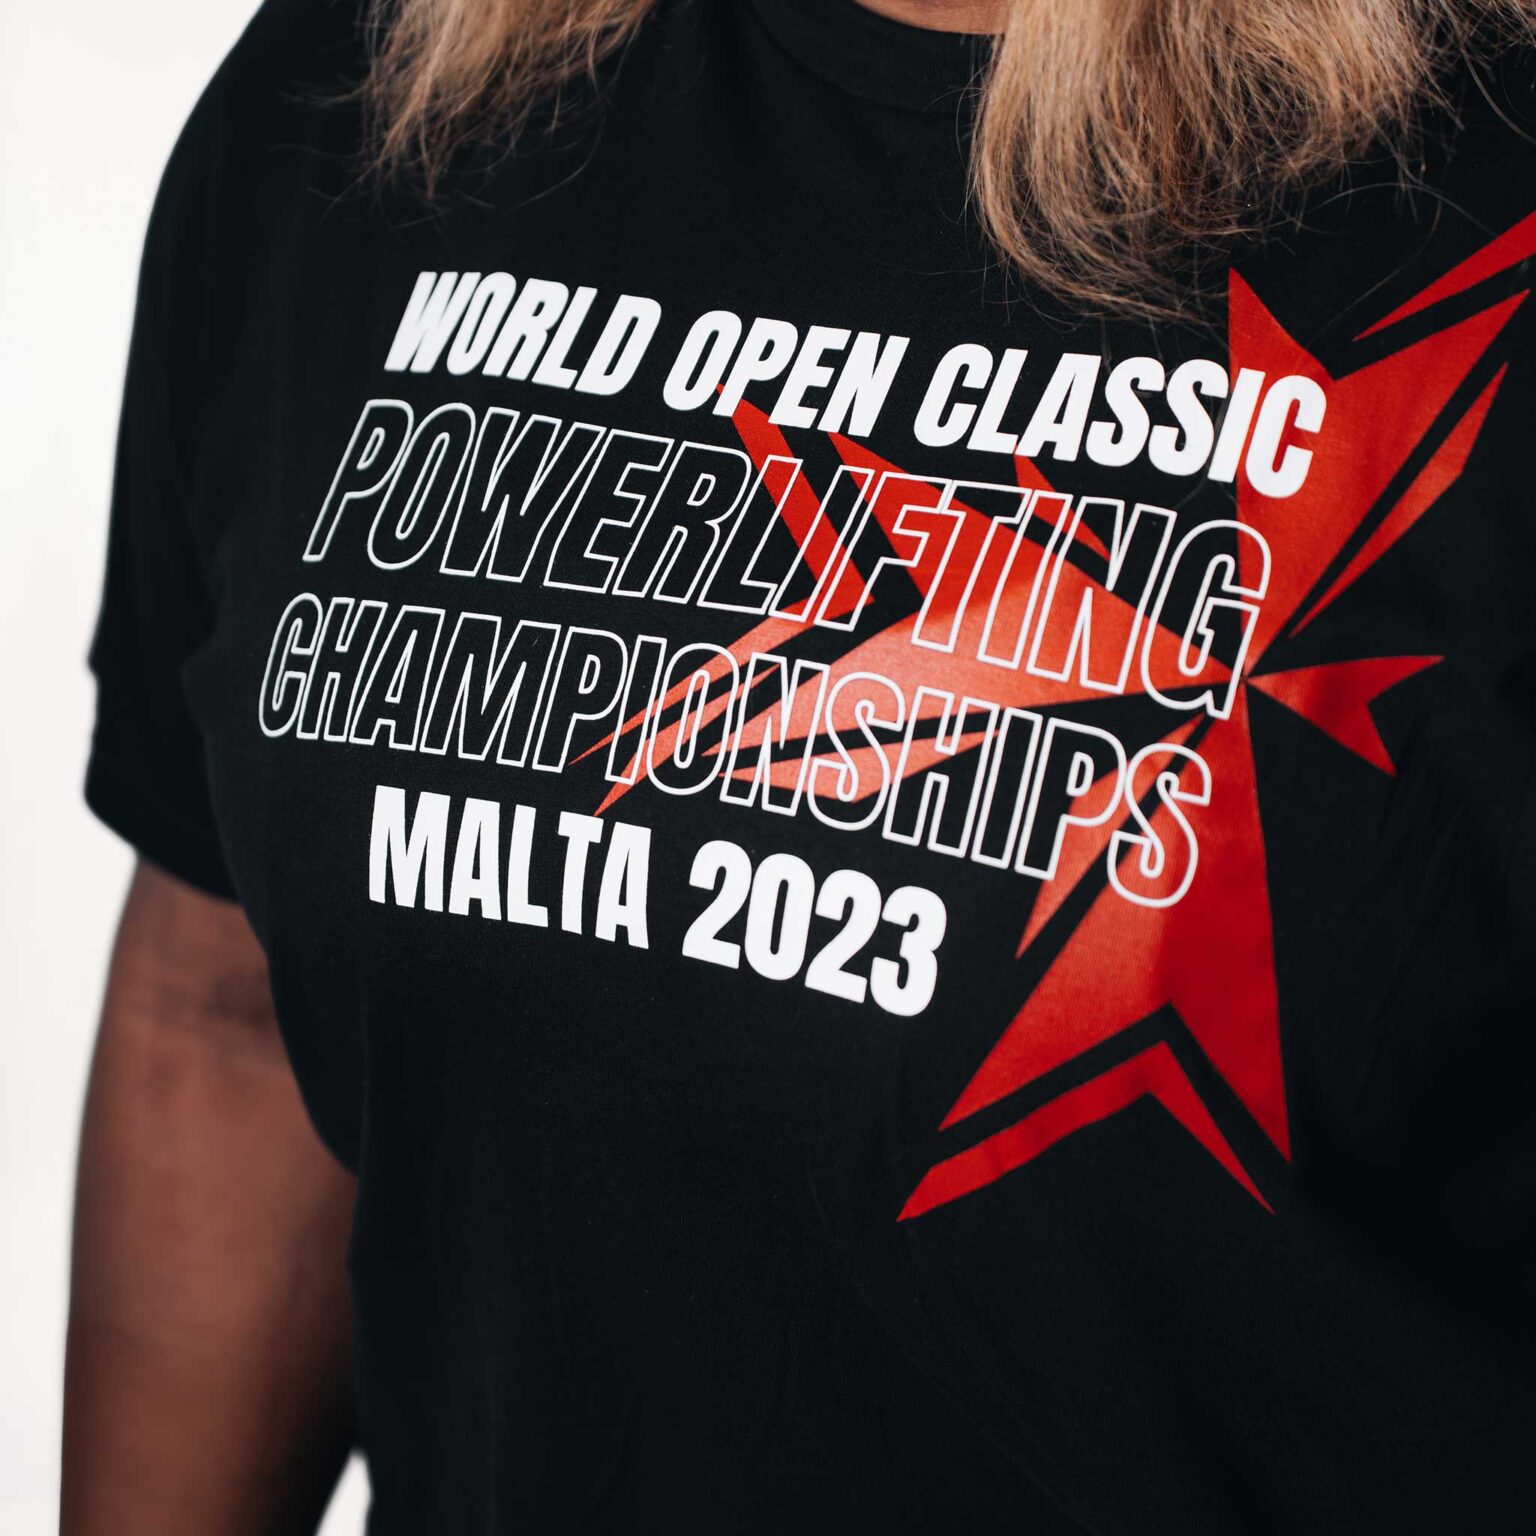 IPF Classic Open Worlds Event TShirt SBD Apparel